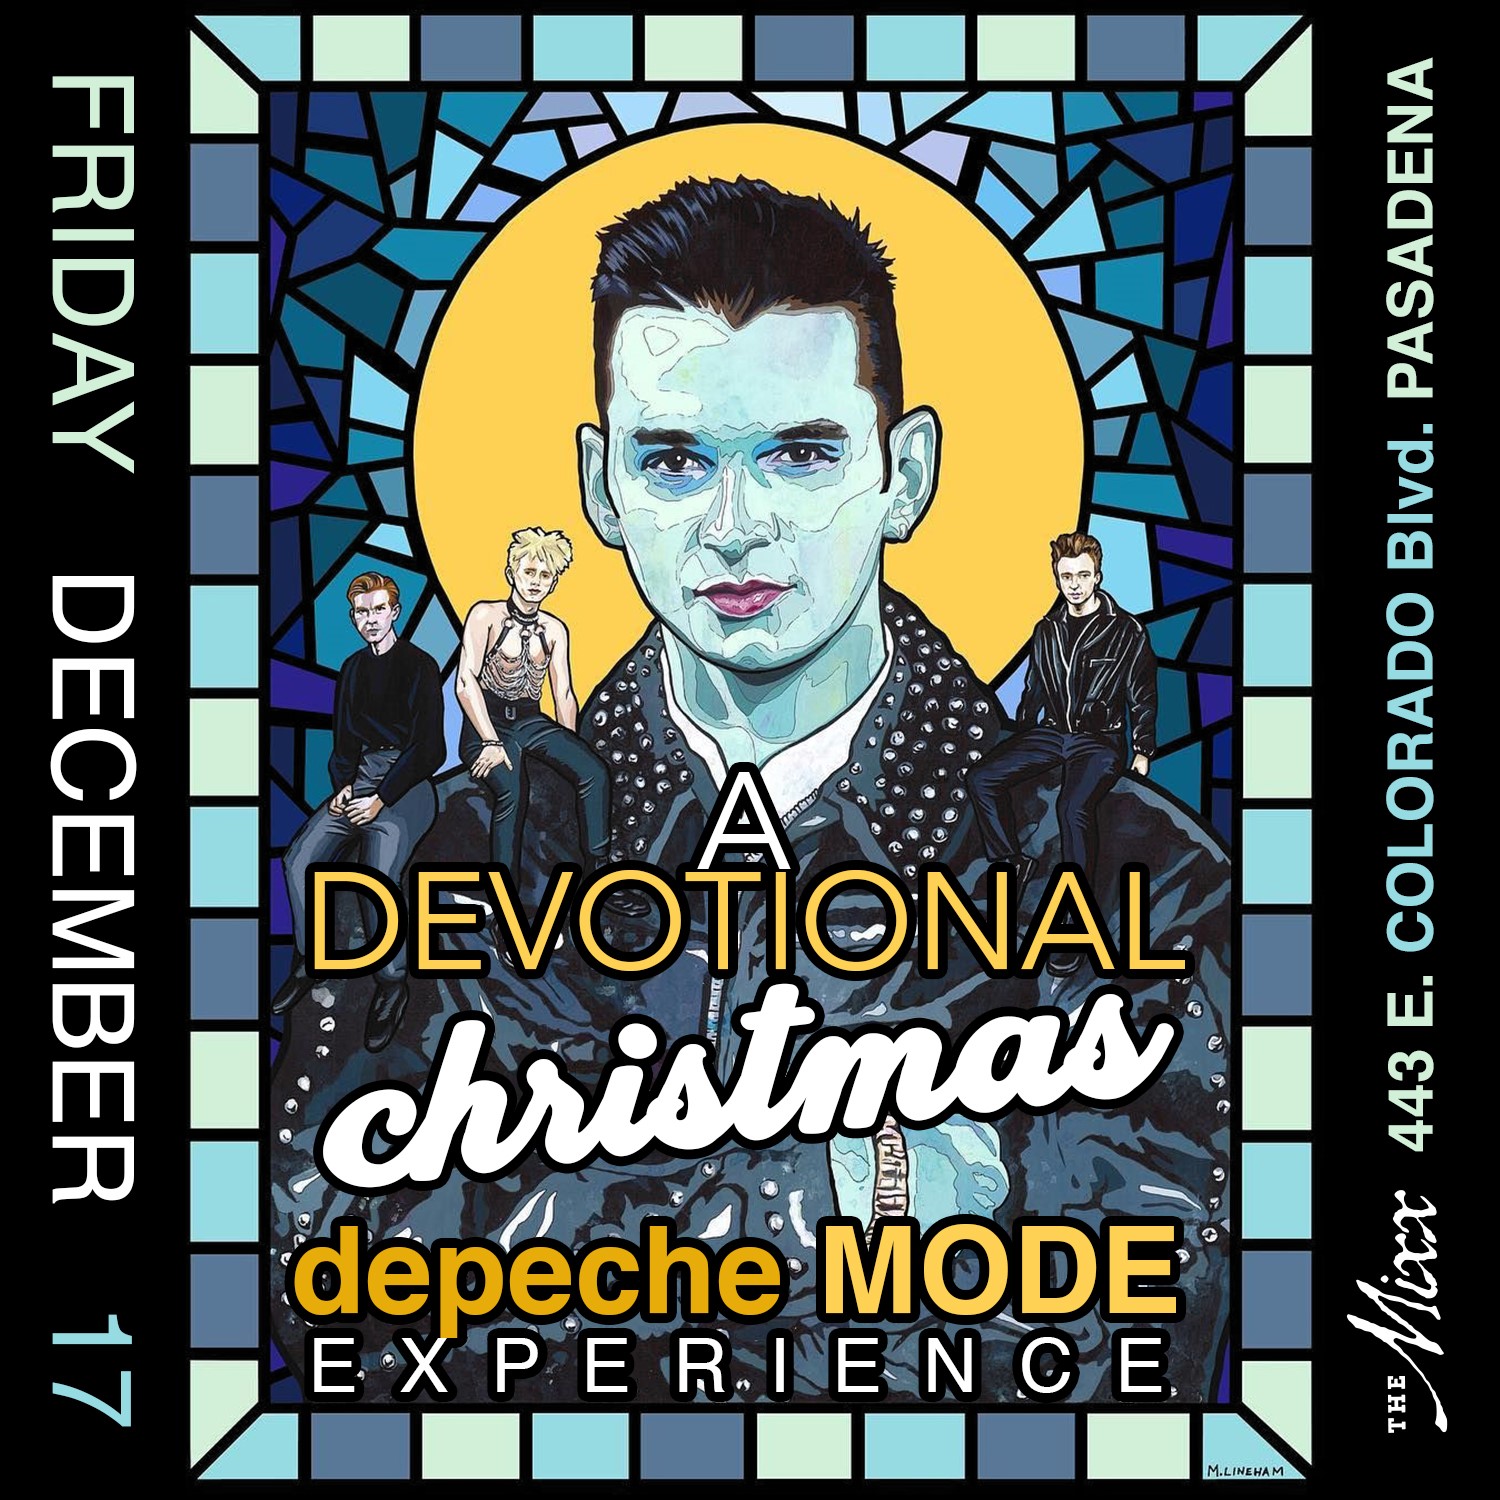 You are currently viewing Devotional – The Ultimate Depeche Mode Experience